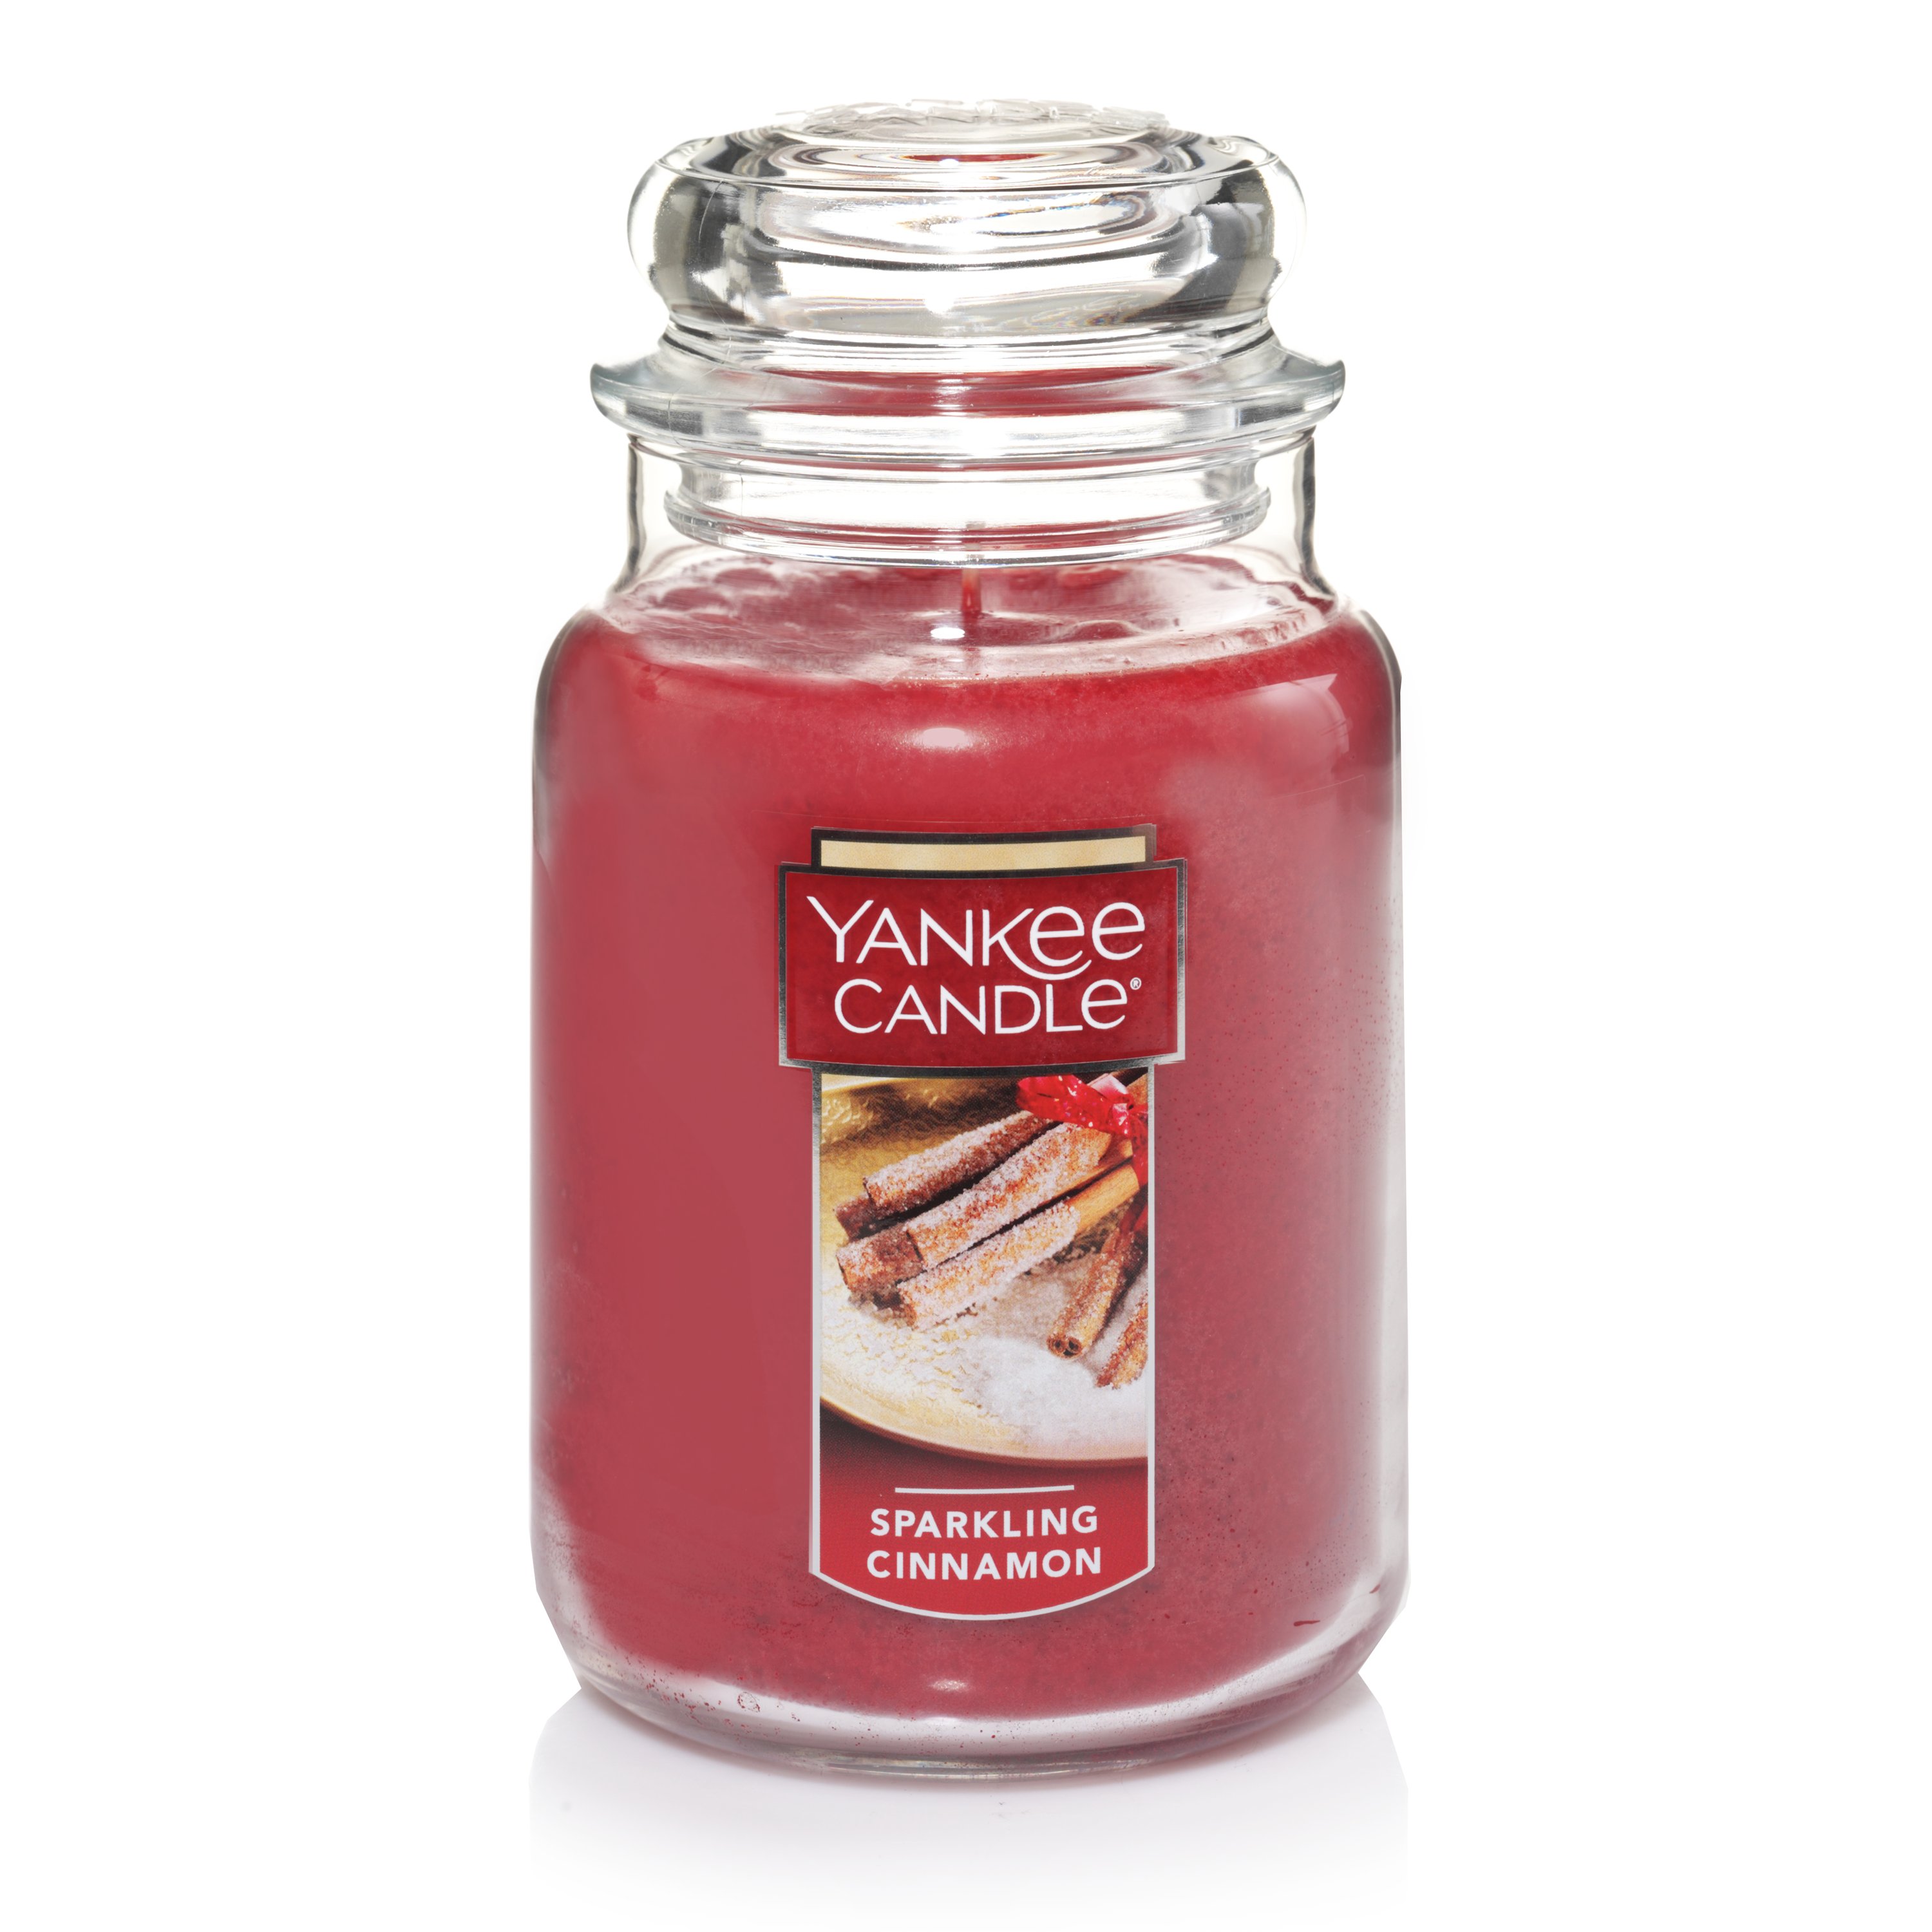 Yankee Candle Large 2-Wick Tumbler Candle Sparkling Cinnamon